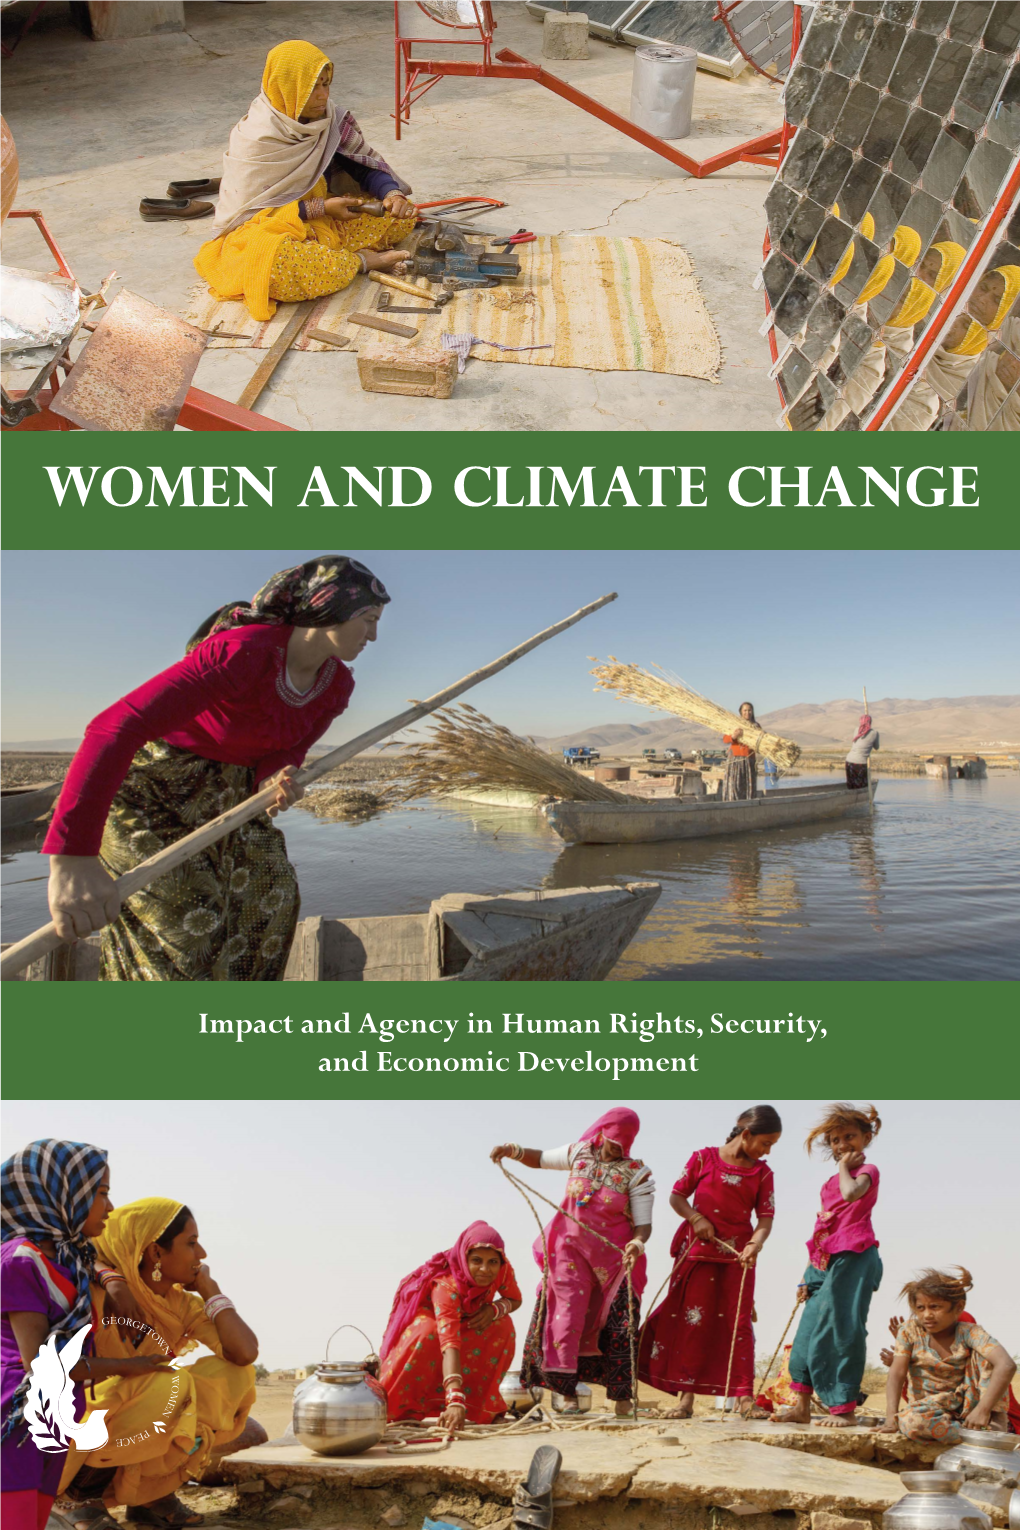 Women and Climate Change: Impact and Agency in Human Rights, Security, and Economic Development